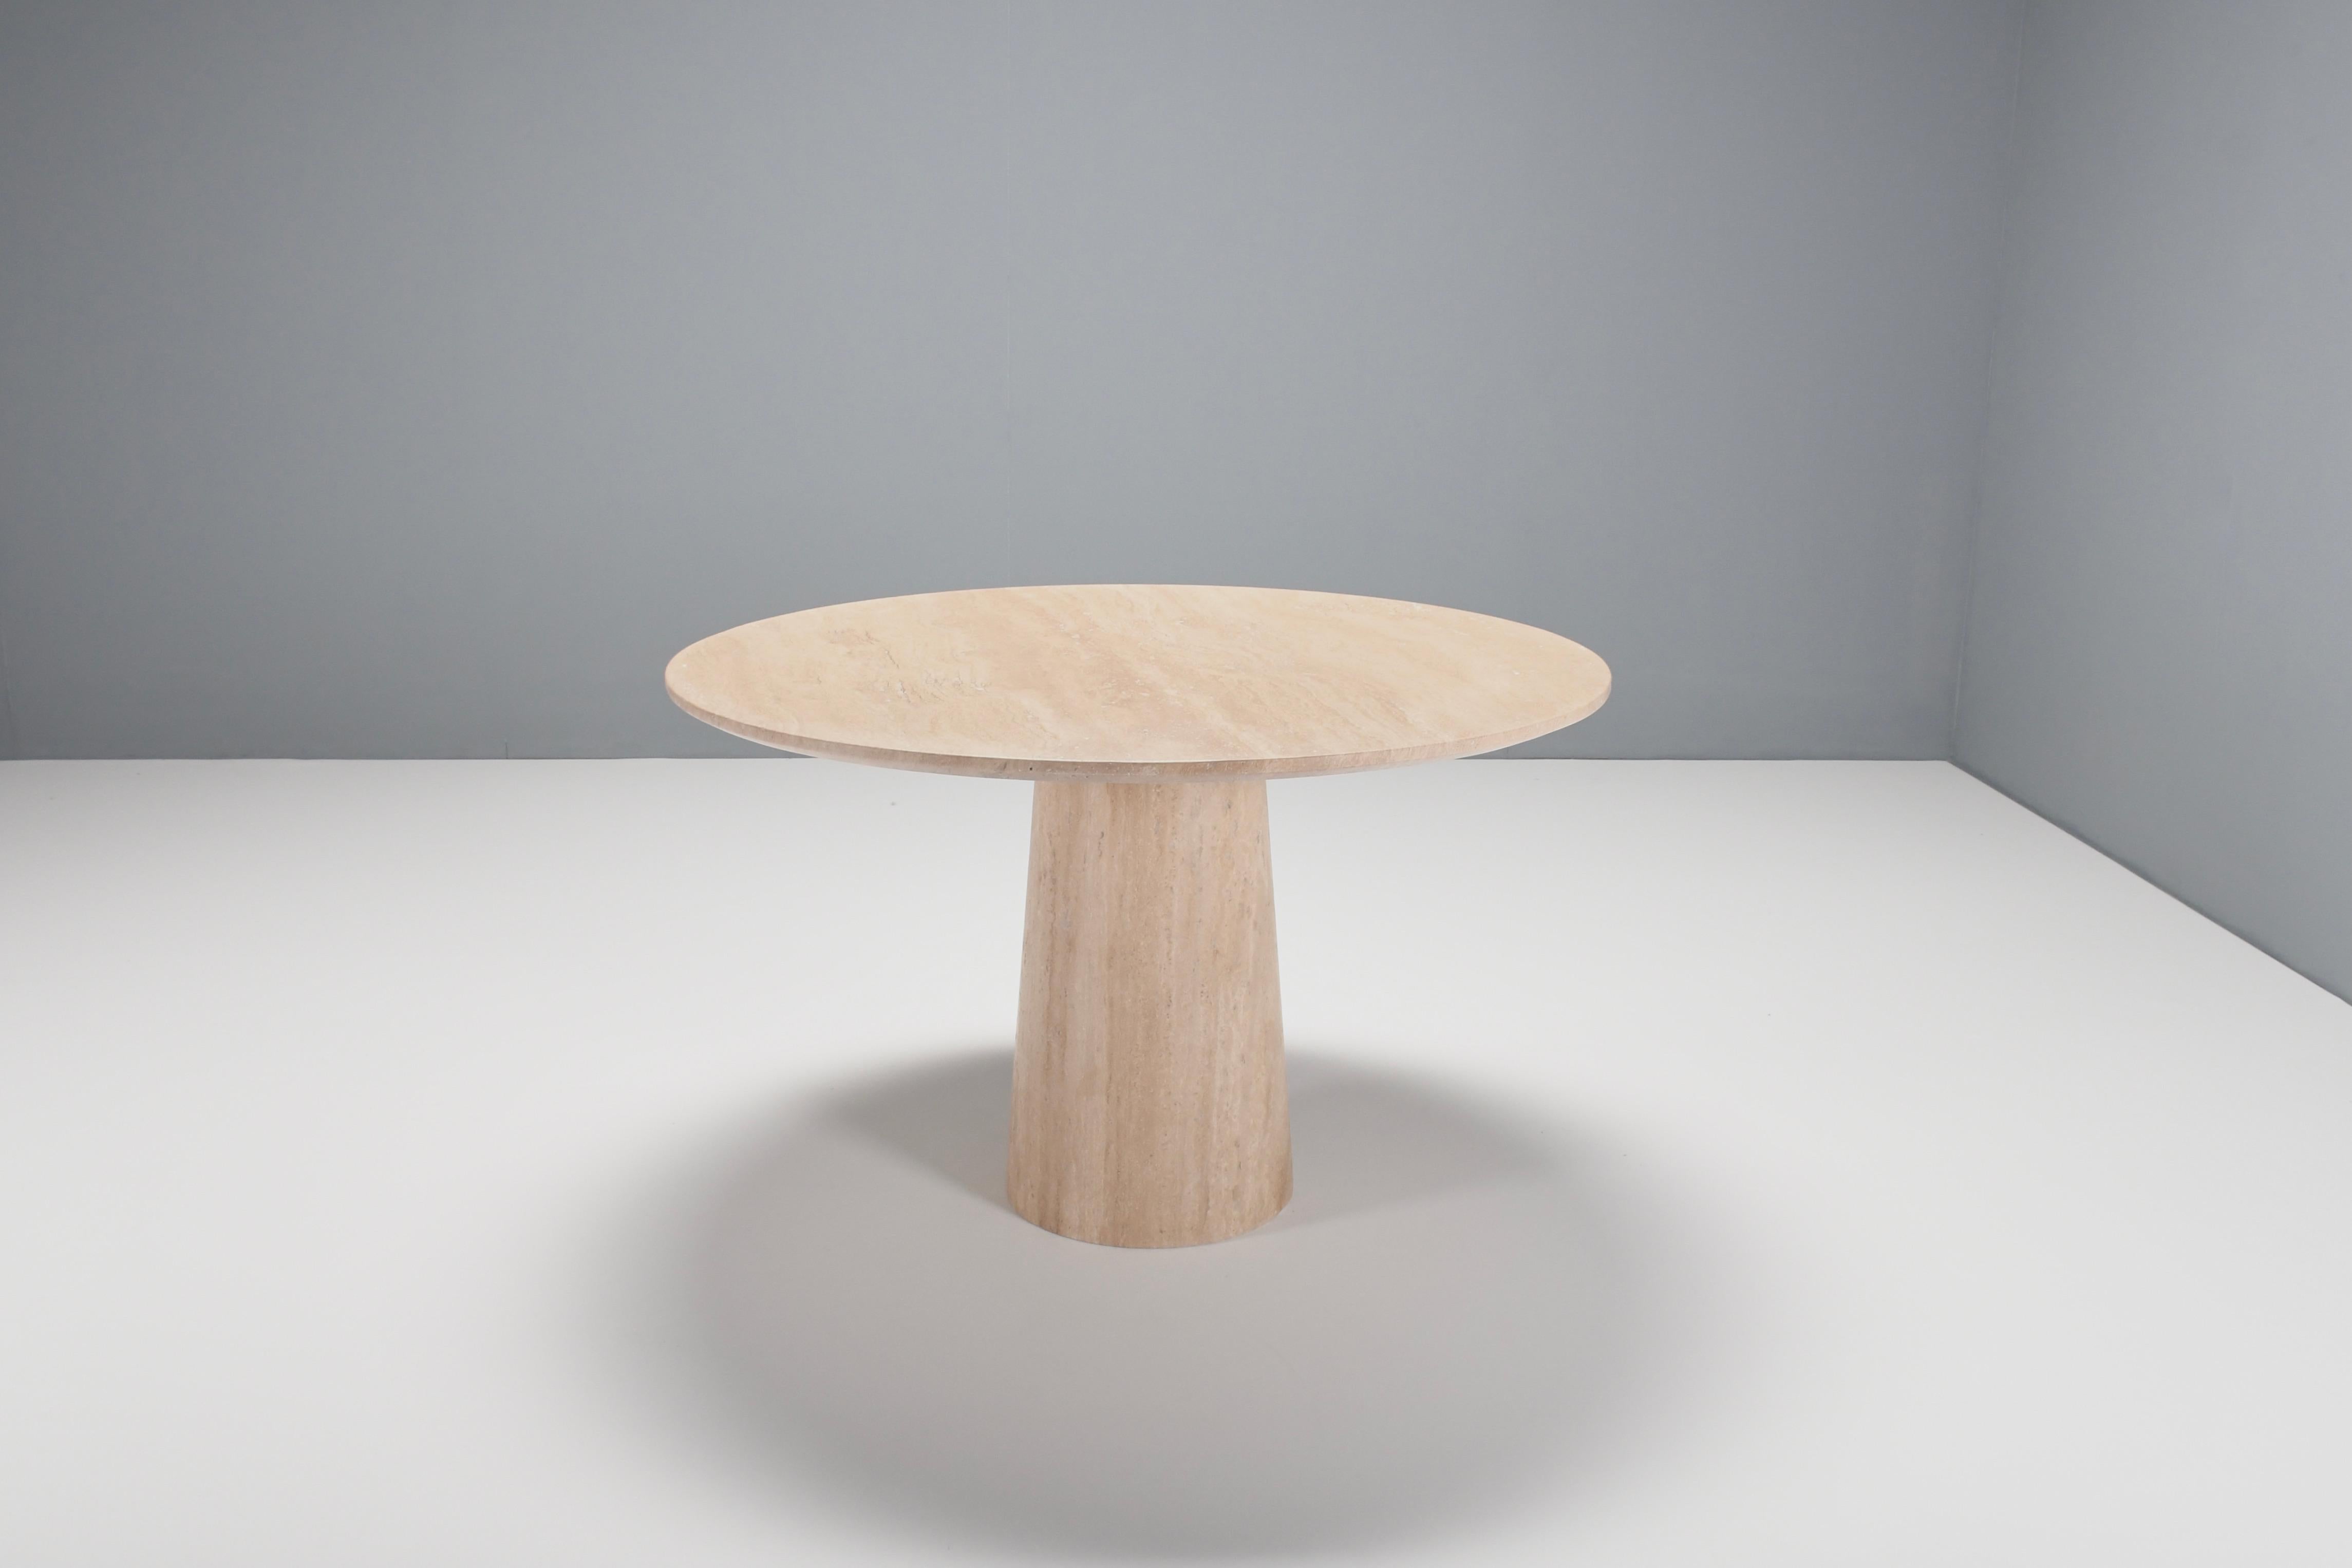 Natural Italian travertine marble dining table in very good condition.

Thick travertine top in variegated tones of beige and brown. 

The top rests on a round, conical shaped pedestal base also made of travertine. 

The top is securely